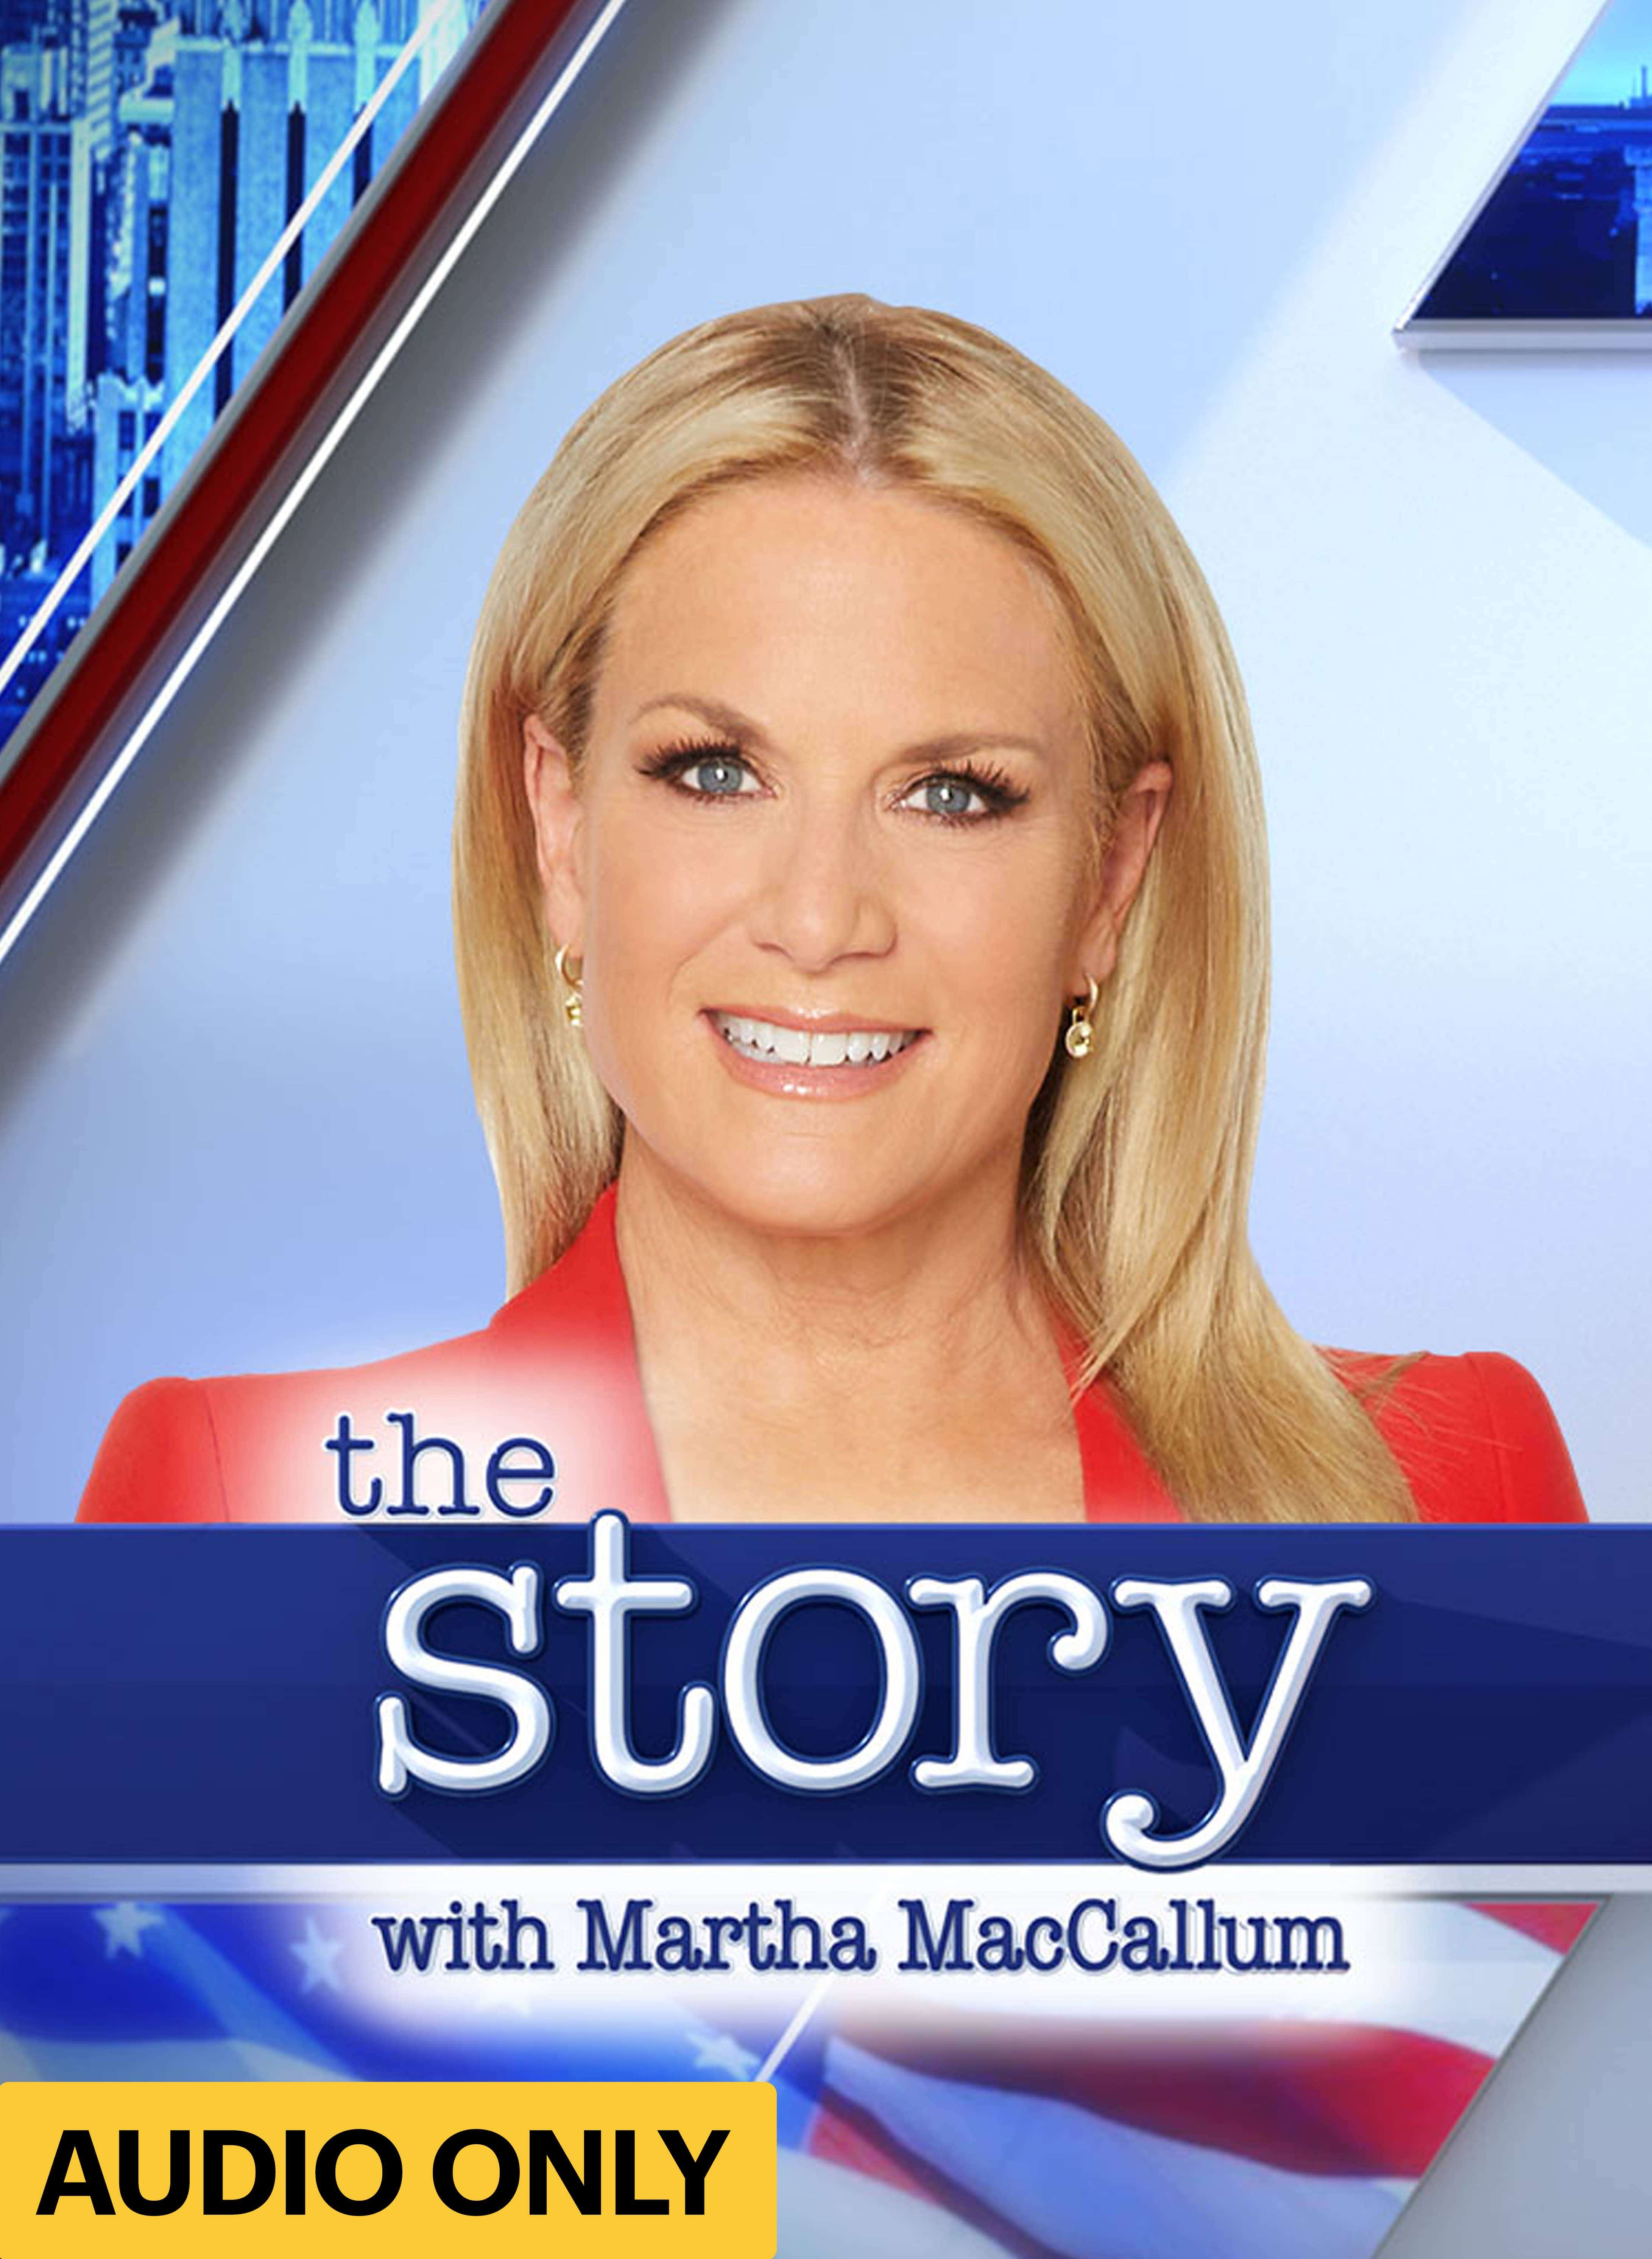 The Story with Martha MacCallum dcg-mark-poster